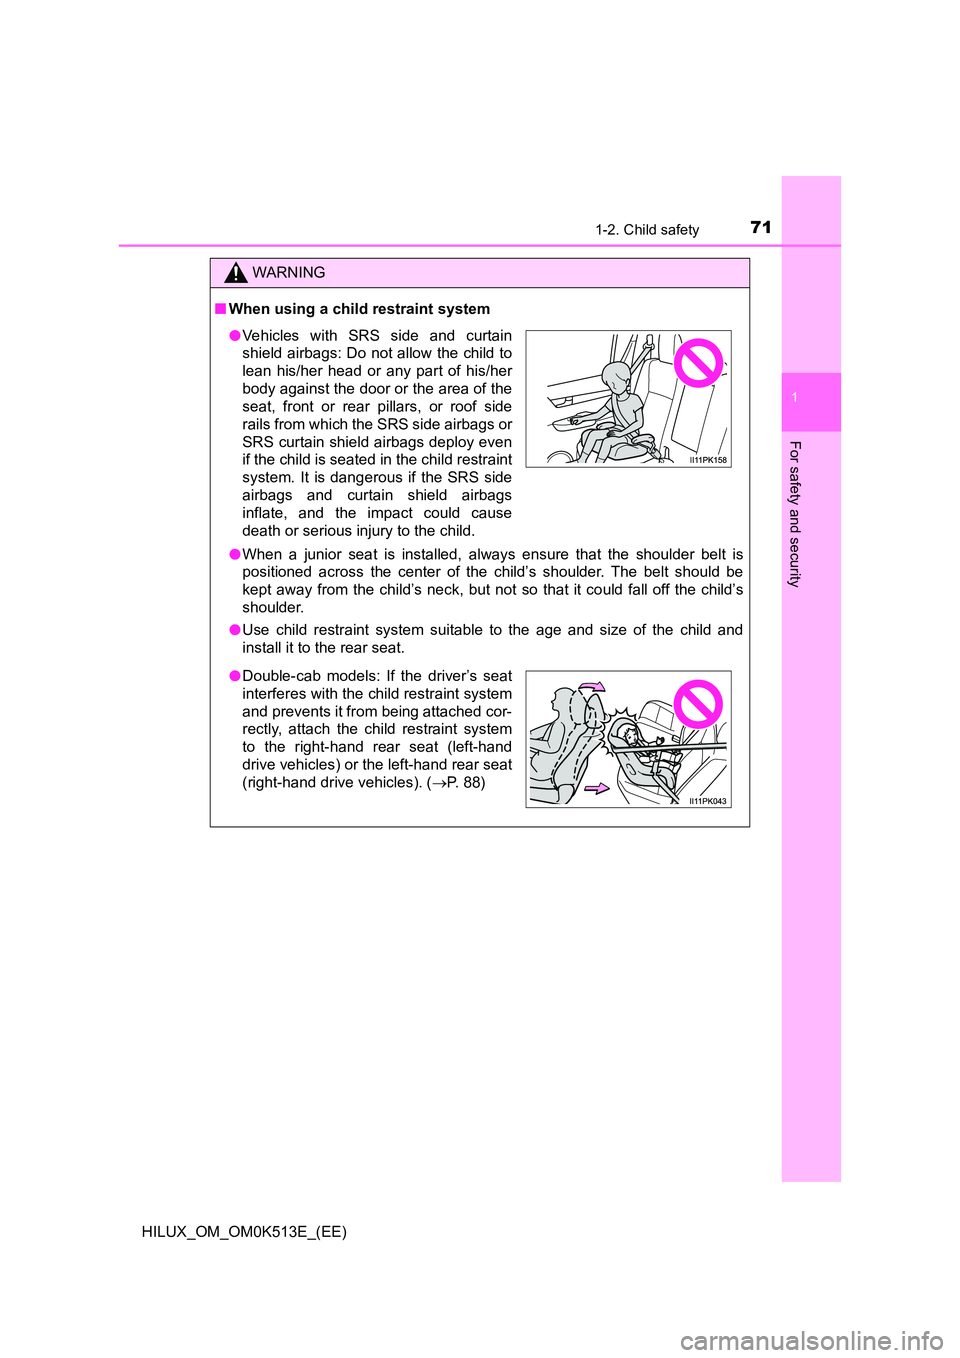 TOYOTA HILUX 2021   (in English) User Guide 711-2. Child safety
1
HILUX_OM_OM0K513E_(EE)
For safety and security
WARNING
�QWhen using a child restraint system 
�O When a junior seat is installed, always ensure that the shoulder belt is 
positio